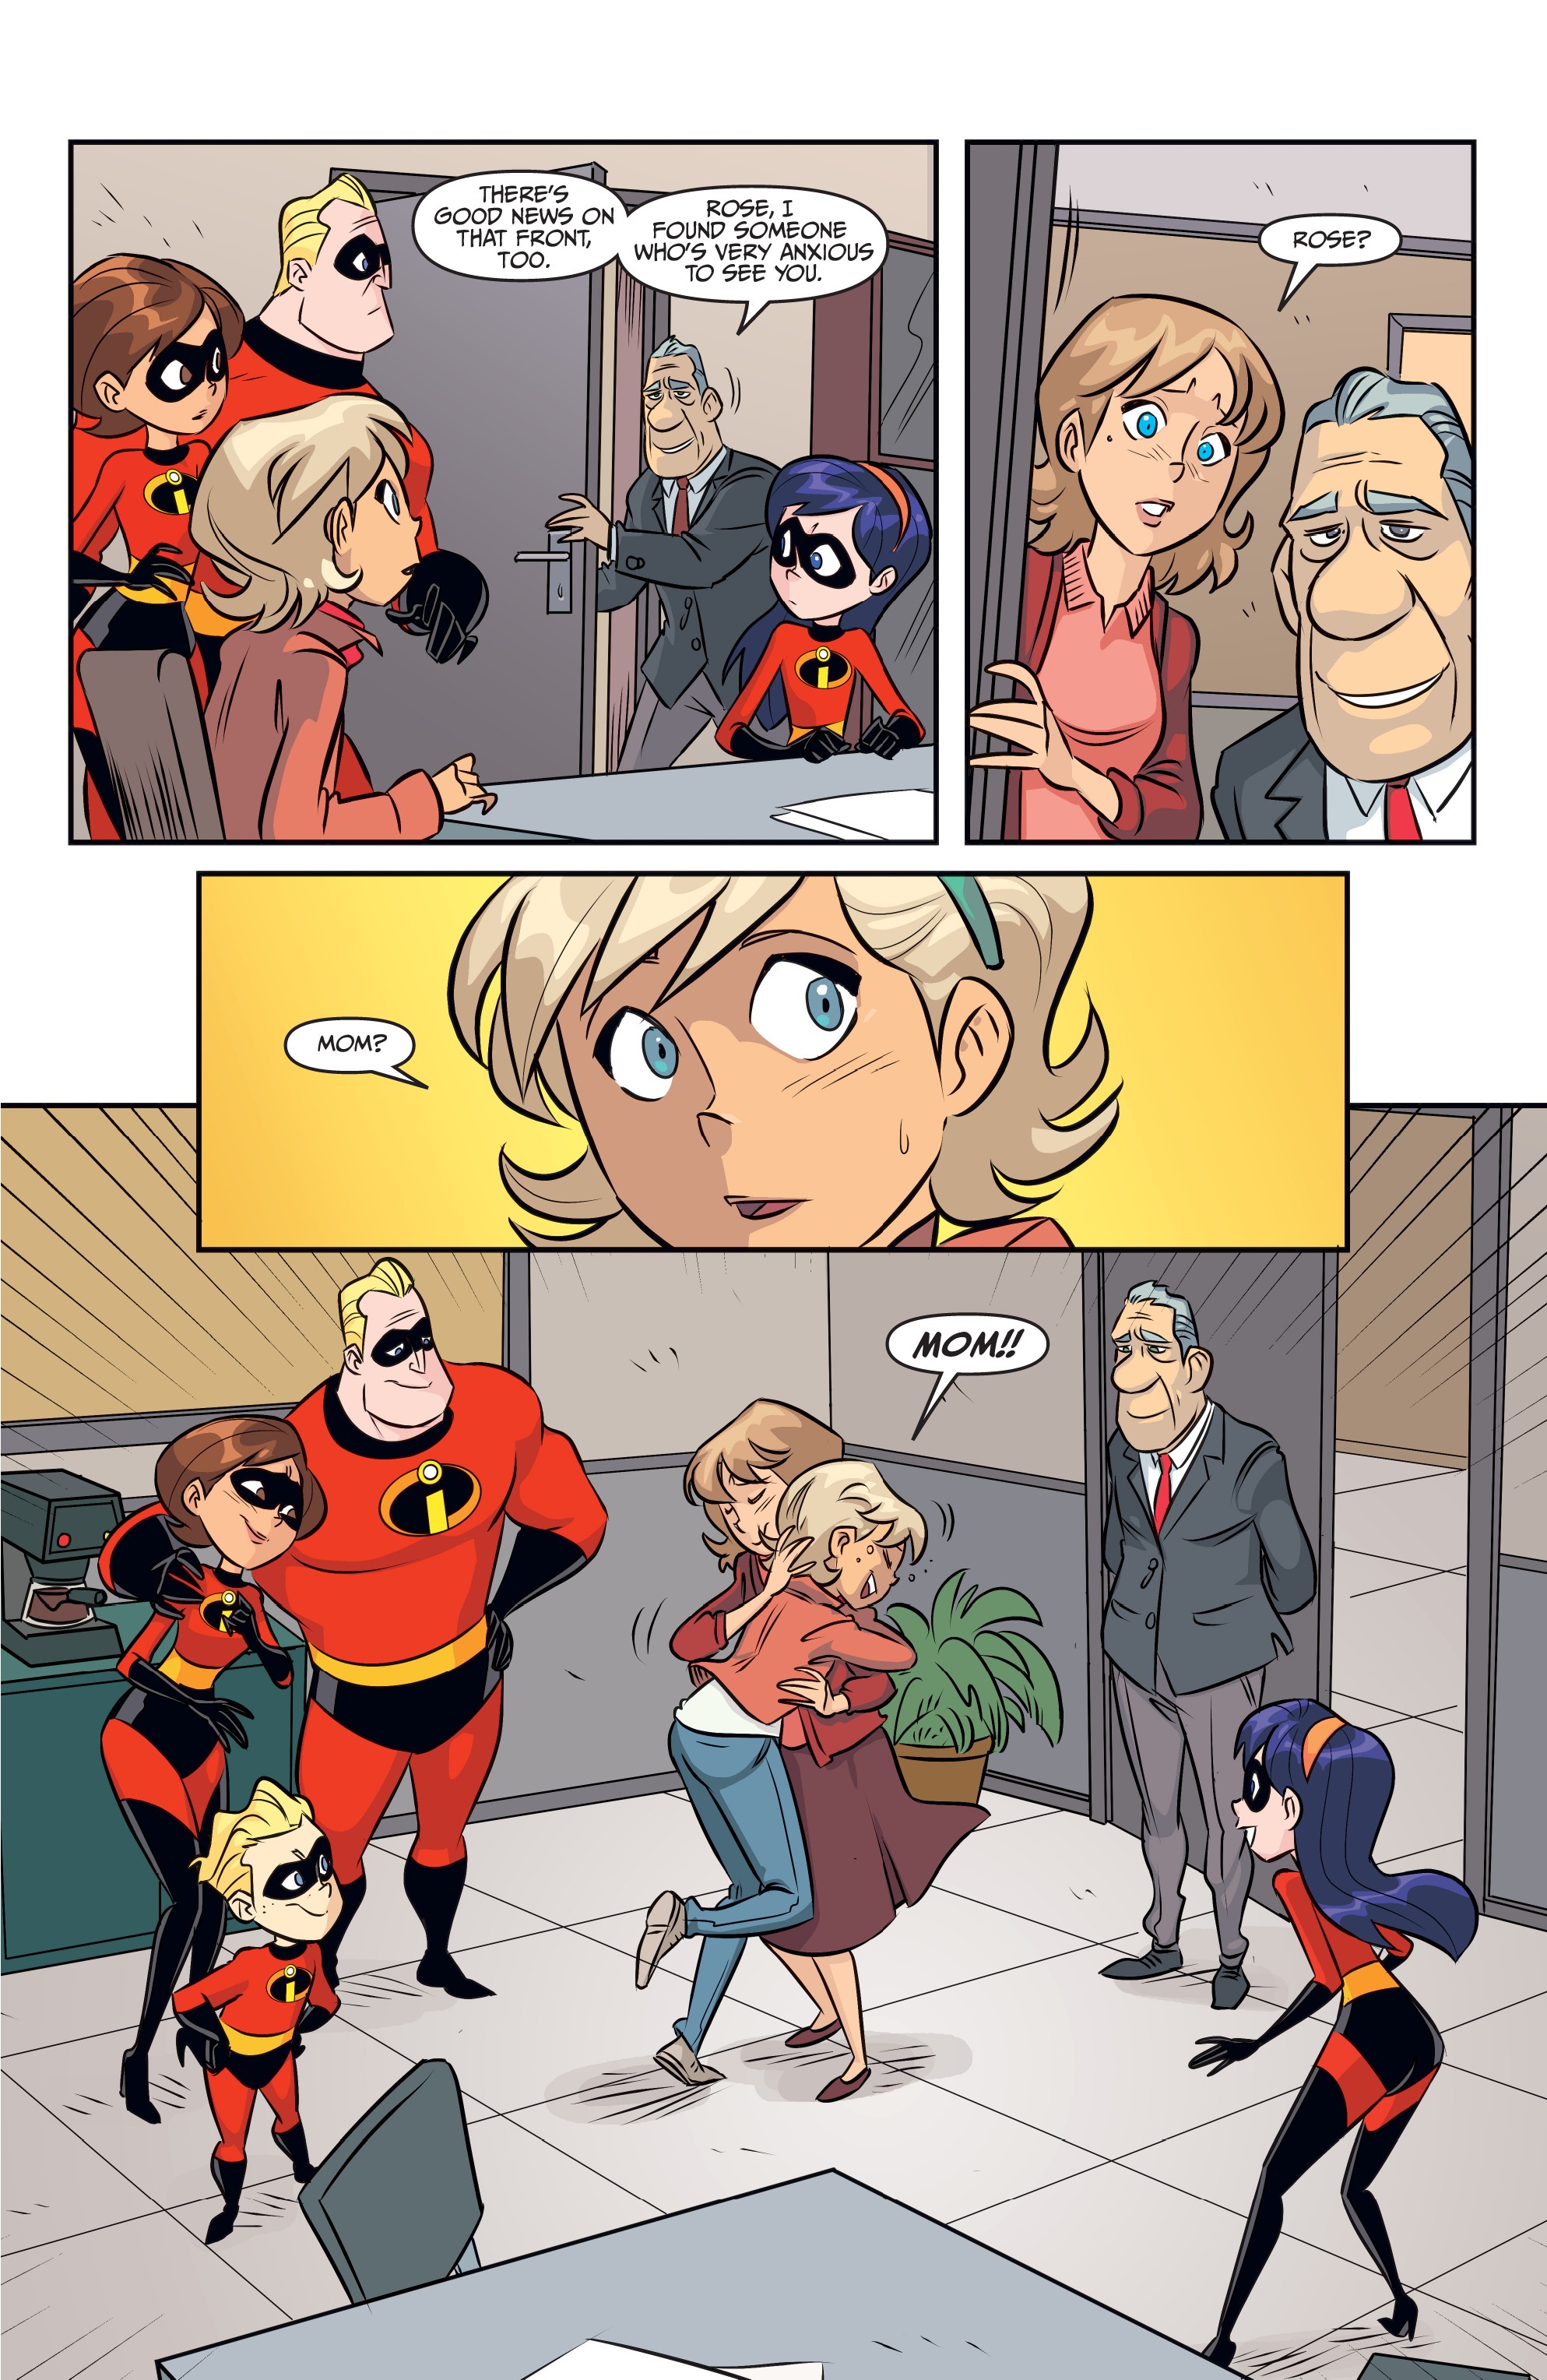 Disney Pixar The Incredibles 2 Secret Identities Issue 3 | Read Disney  Pixar The Incredibles 2 Secret Identities Issue 3 comic online in high  quality. Read Full Comic online for free -